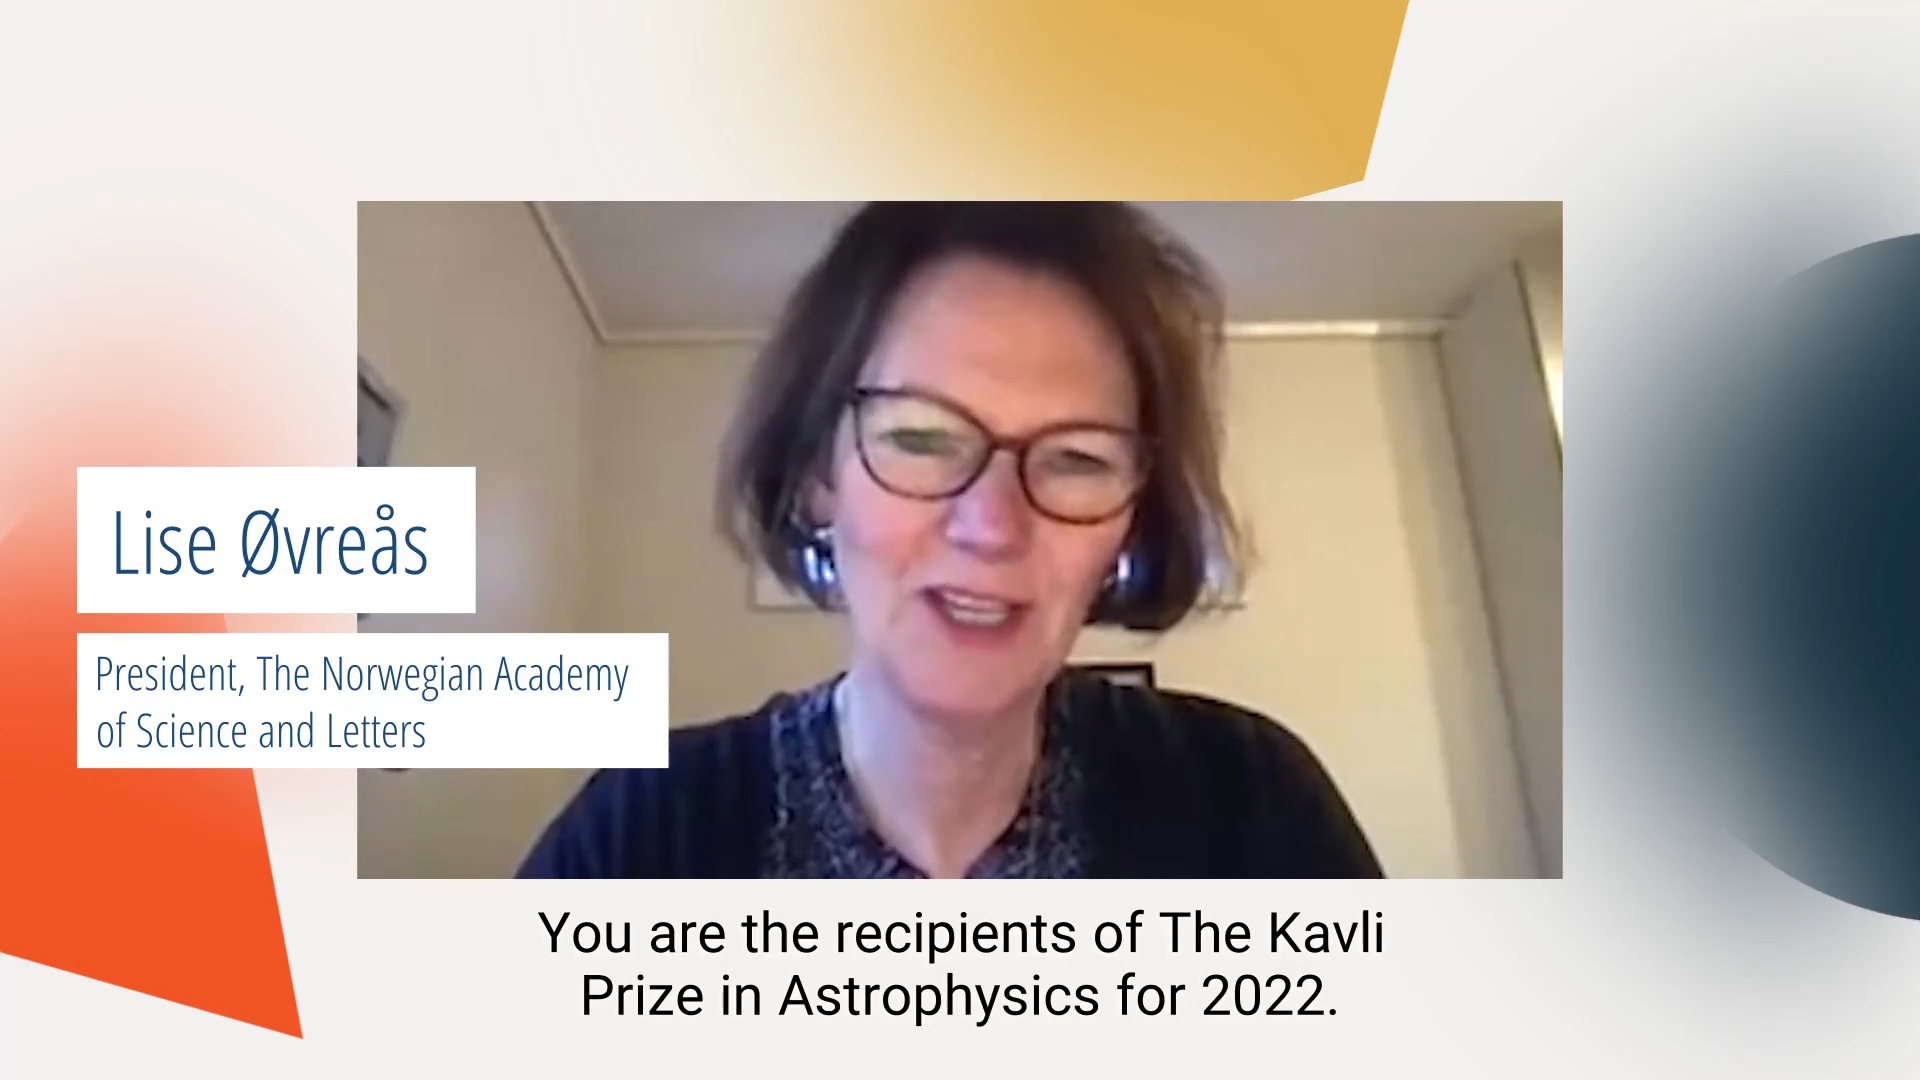 Watch three scientists being informed by the Norwegian Academy of Science and Letters that they are this year's 2022 Kavli Prize Laureates in Astrophysics.